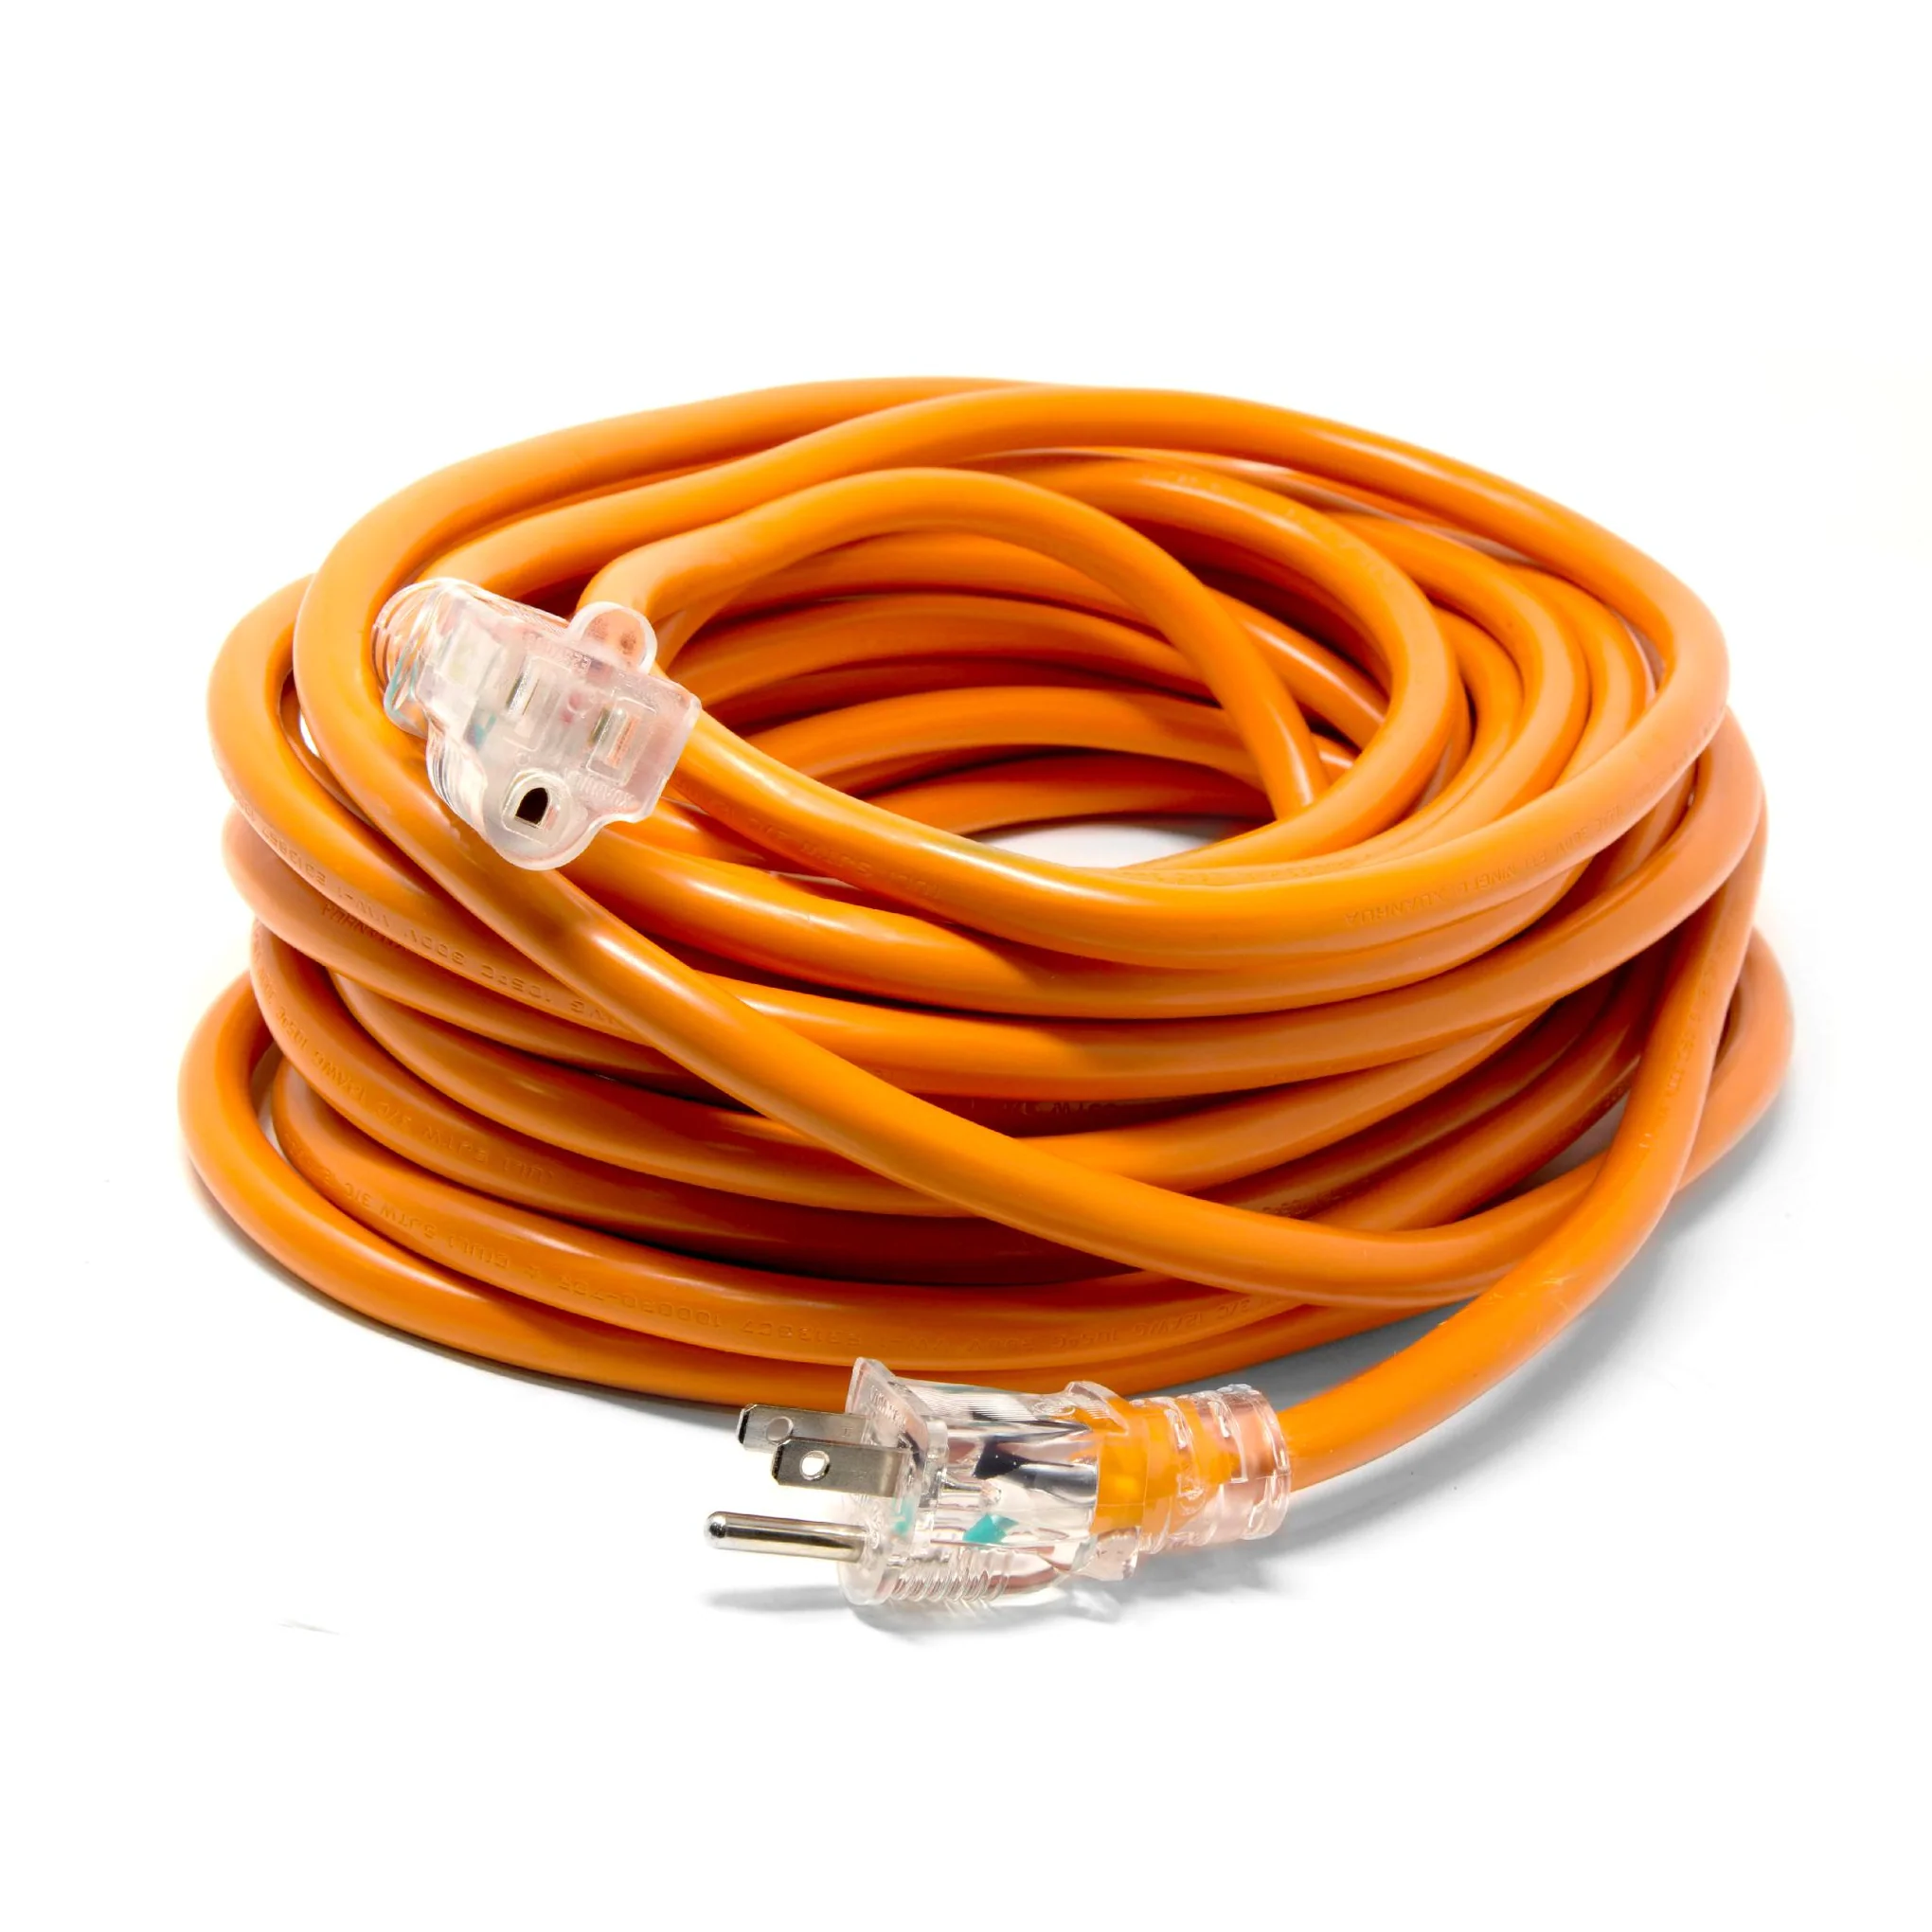 What Is A 12 Gauge Extension Cord